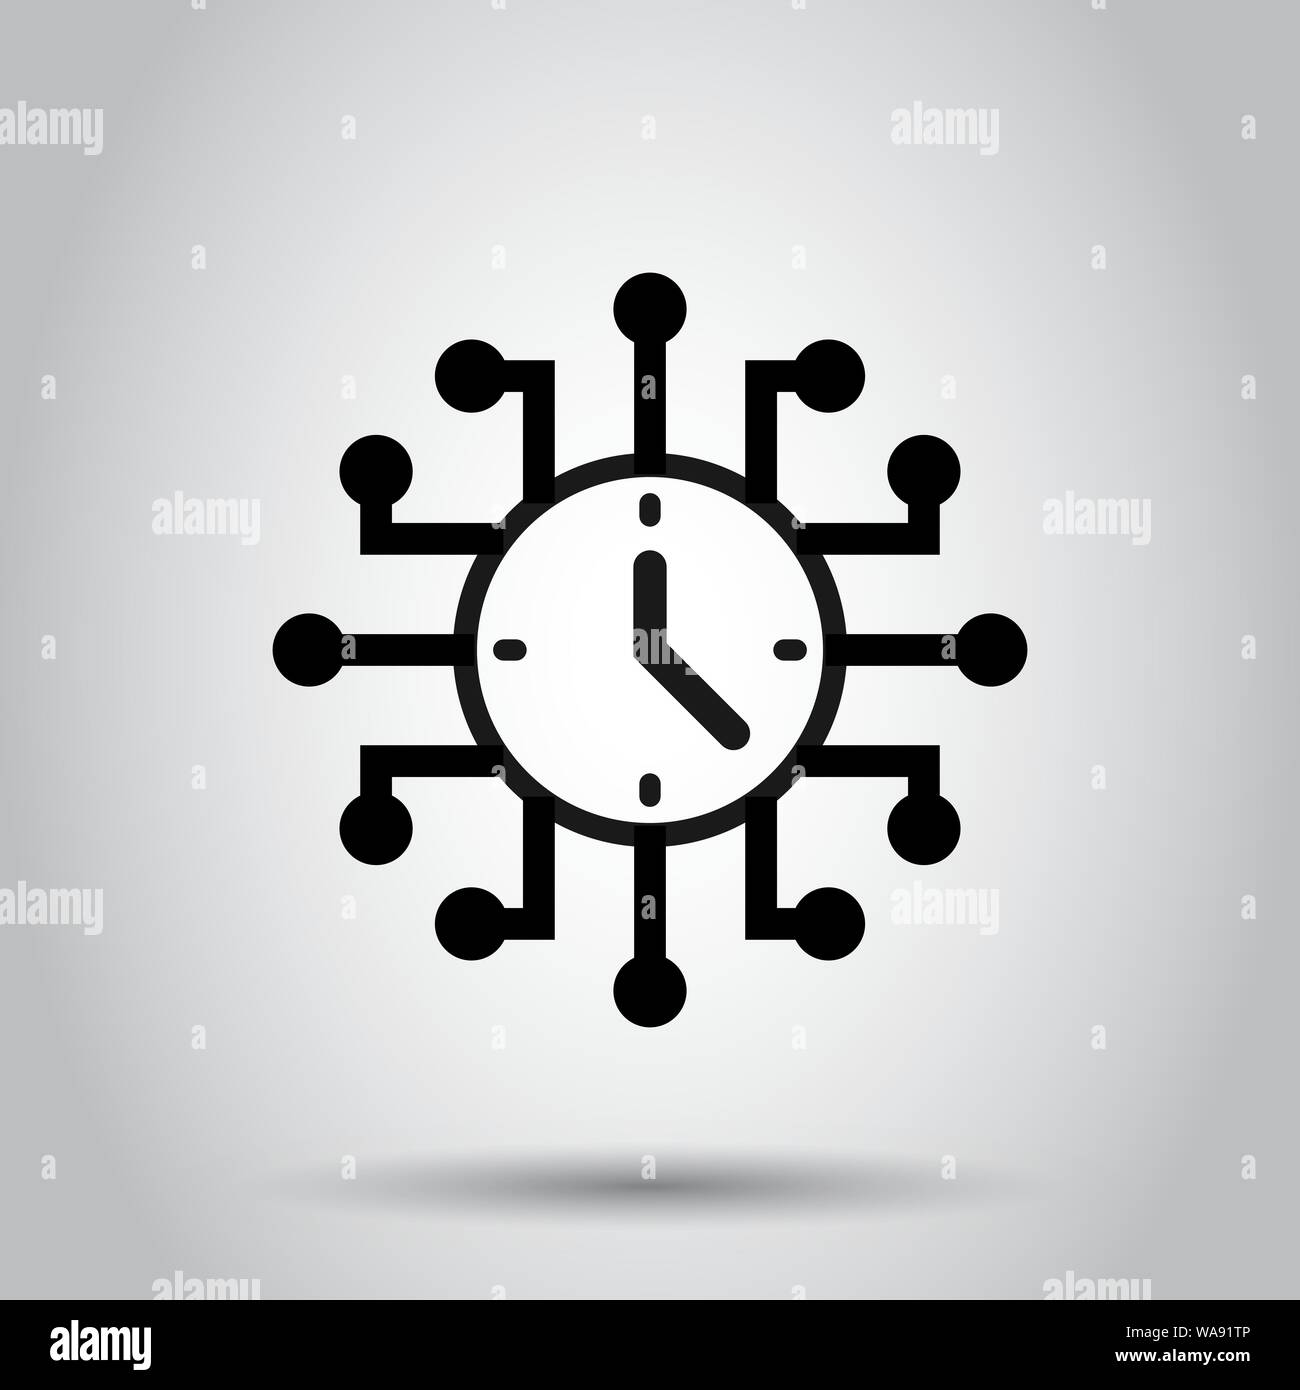 Real time icon in flat style. Clock vector illustration on isolated background. Watch business concept. Stock Vector